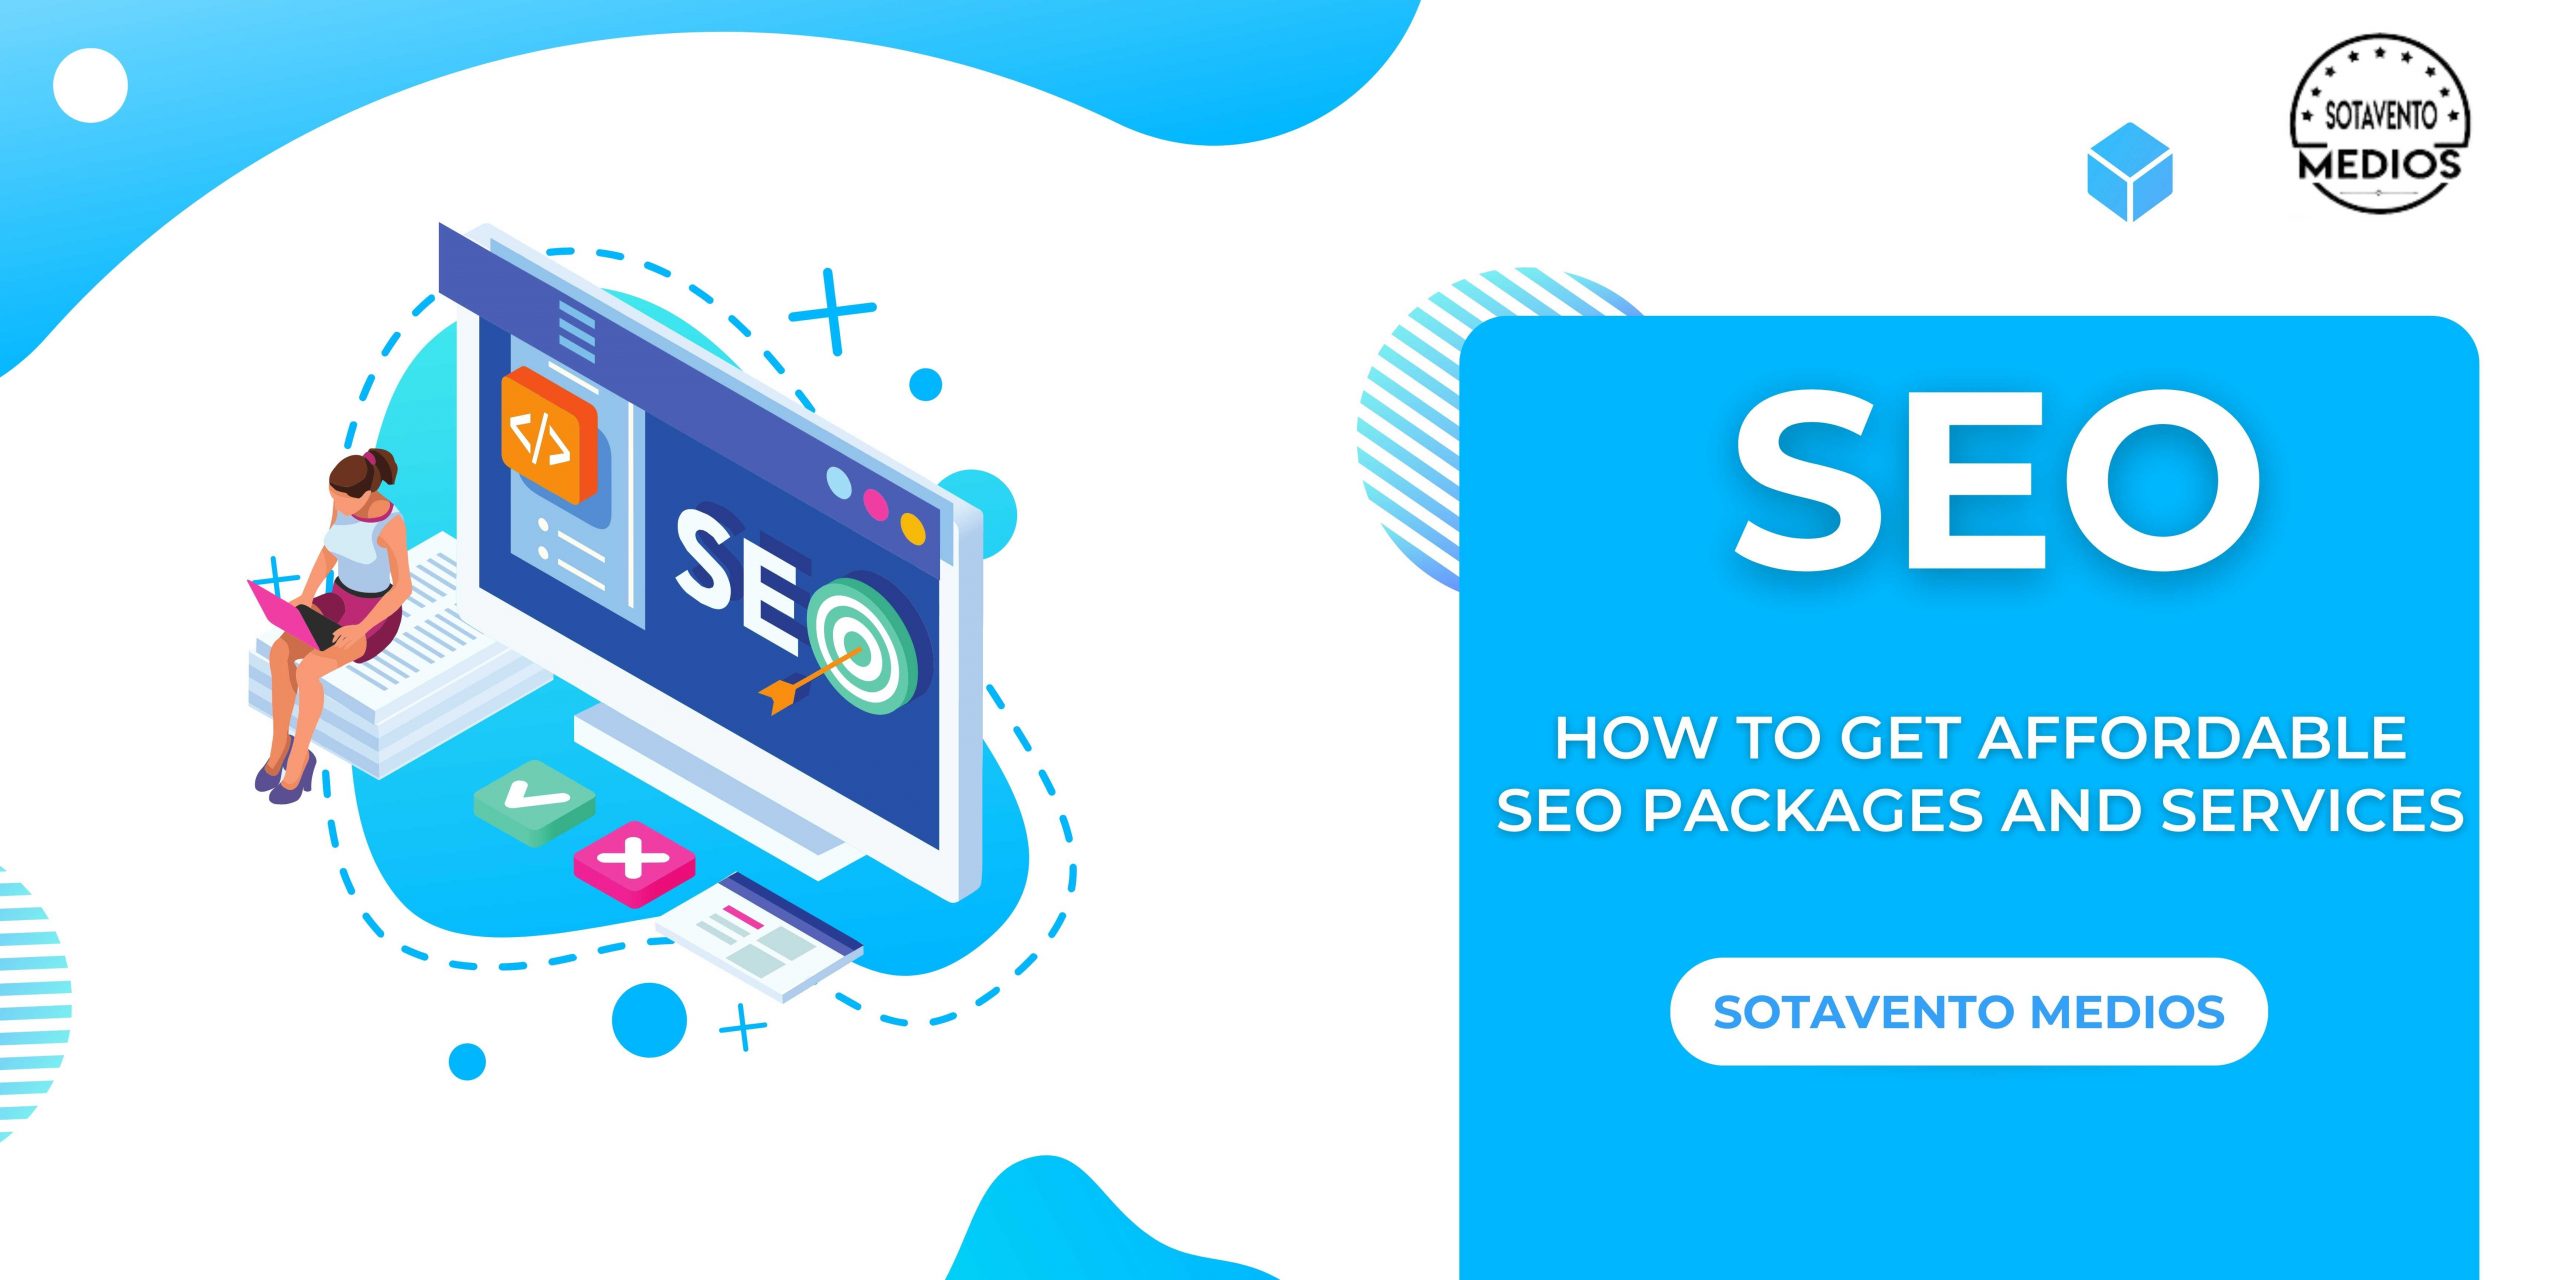 How to Get Affordable SEO Packages and Services